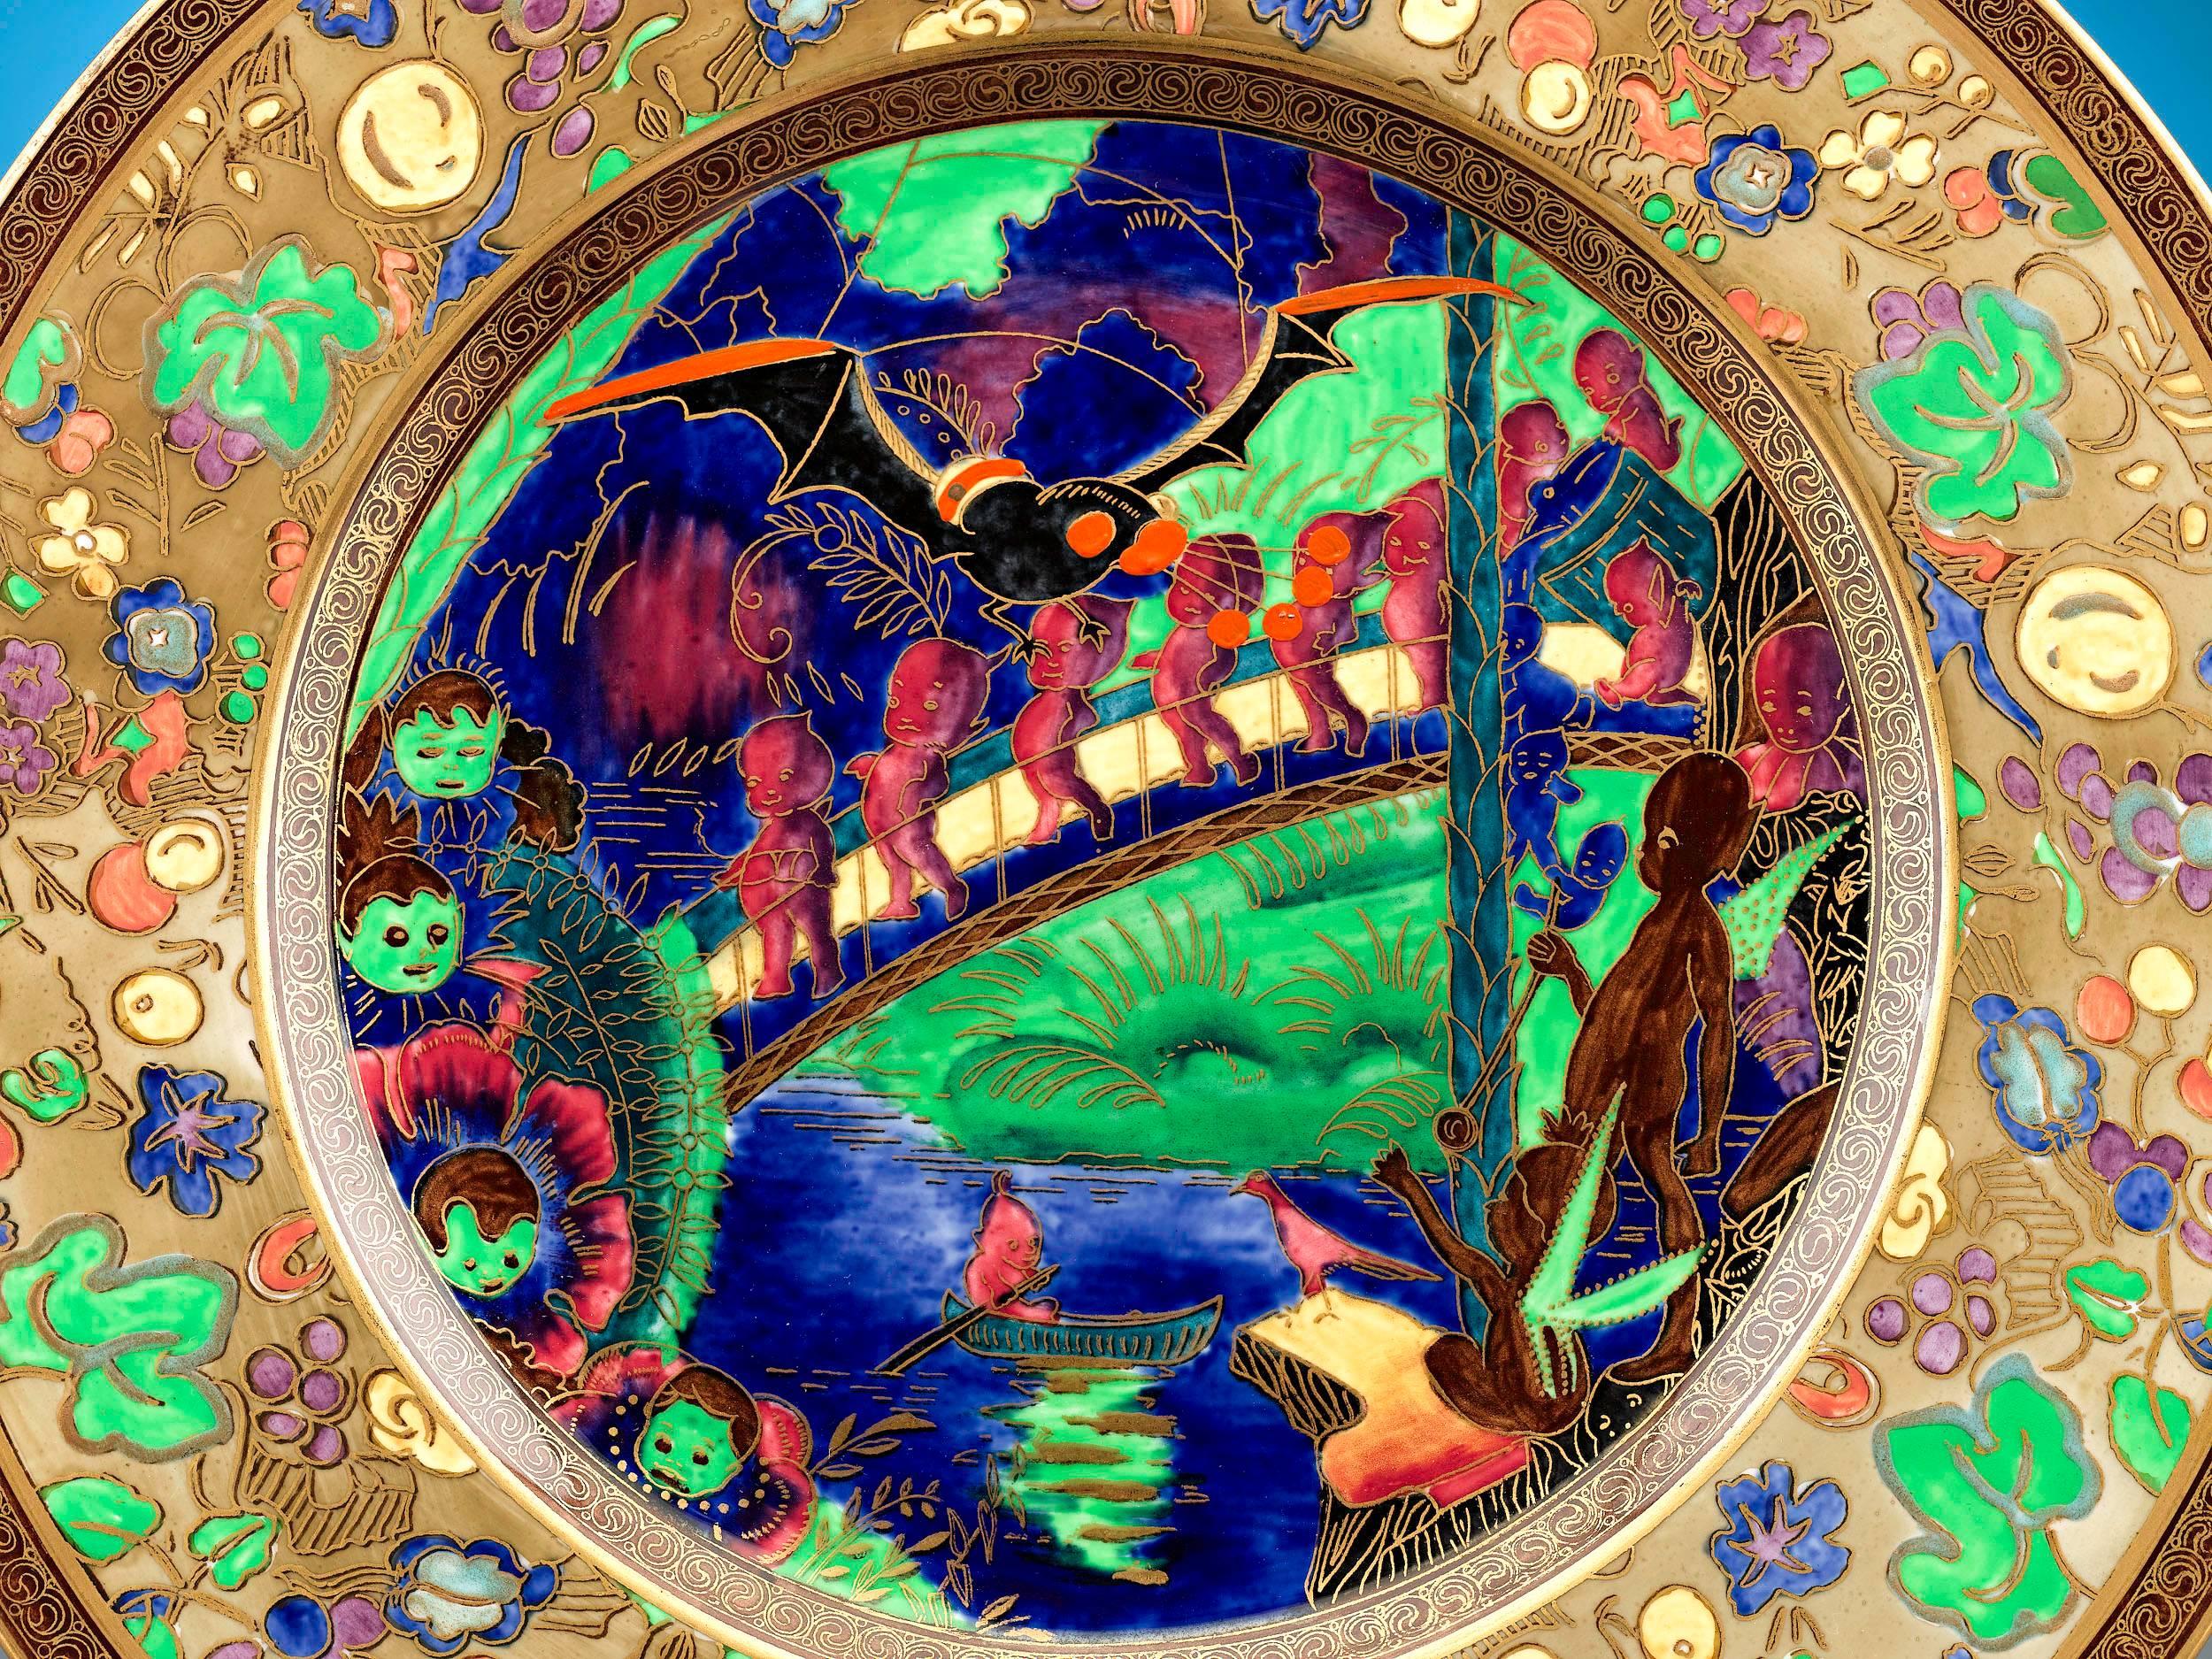 This captivating porcelain plate is a stunning example of the renowned Fairyland Lustre pattern by Wedgwood. The charming “Imps on a Bridge” motif is beautifully rendered on the body of the plate in bright greens, deep blues and lush reds, and